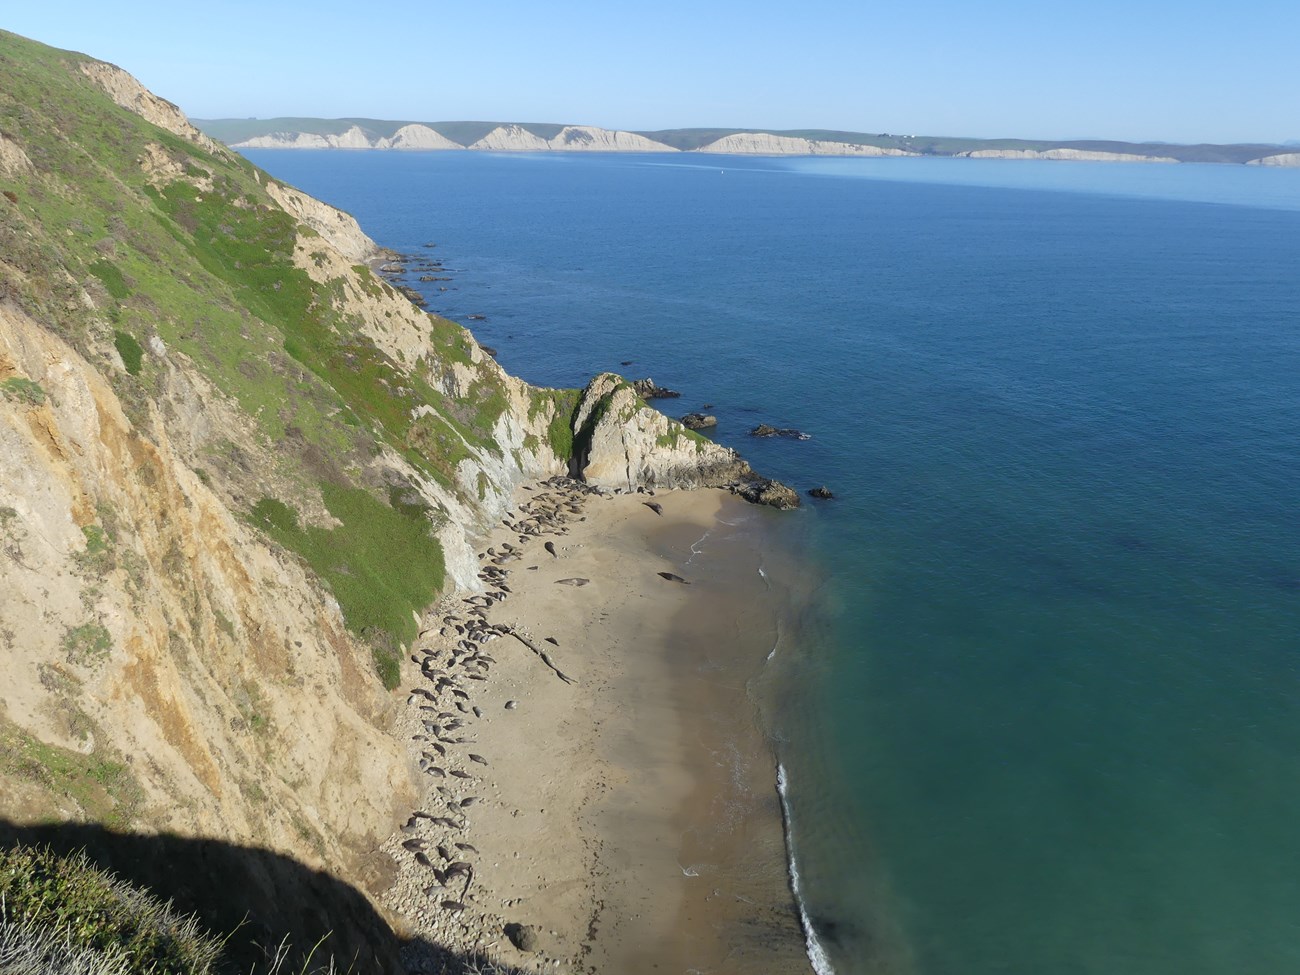 A landscape view of a coastal cove; many elephant seals lay on the sandy beach below the cliff. Dark blue and aqua water extends to the right.